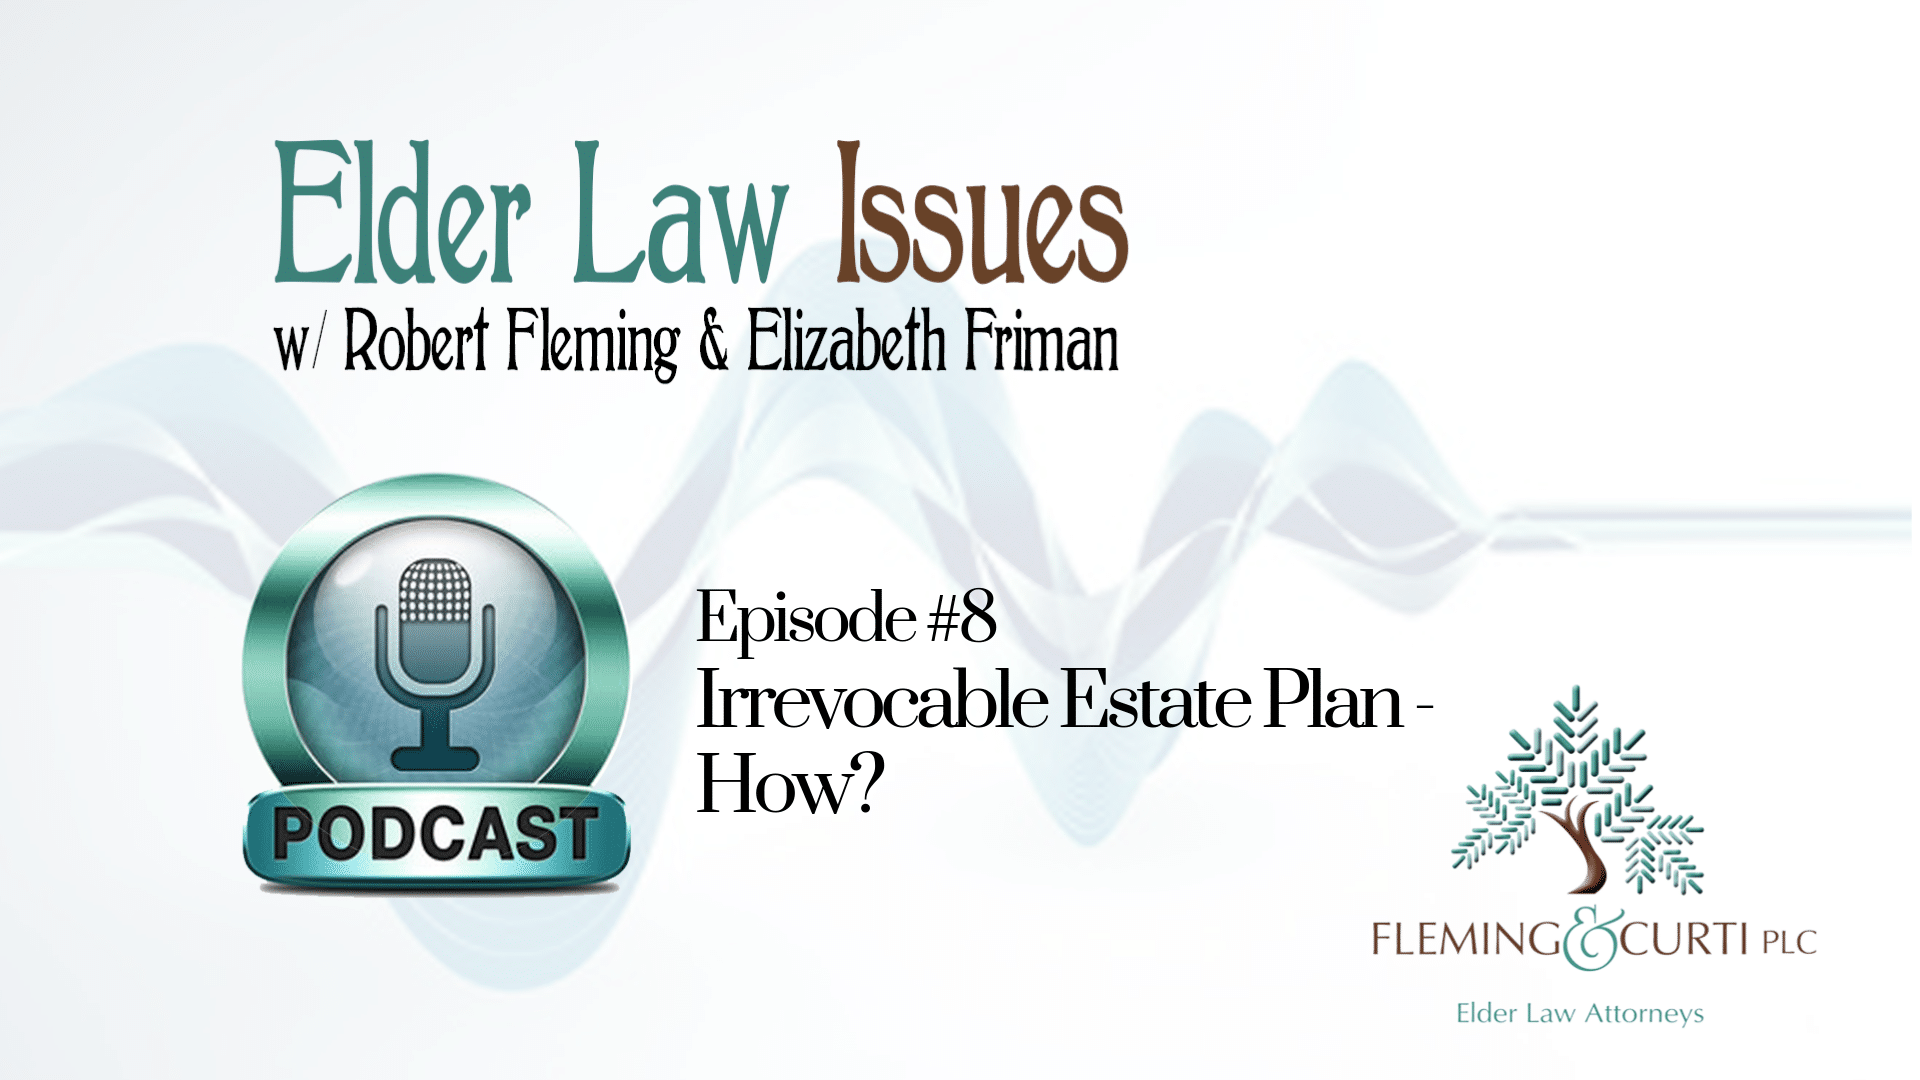 Irrevocable Estate Plan - How?